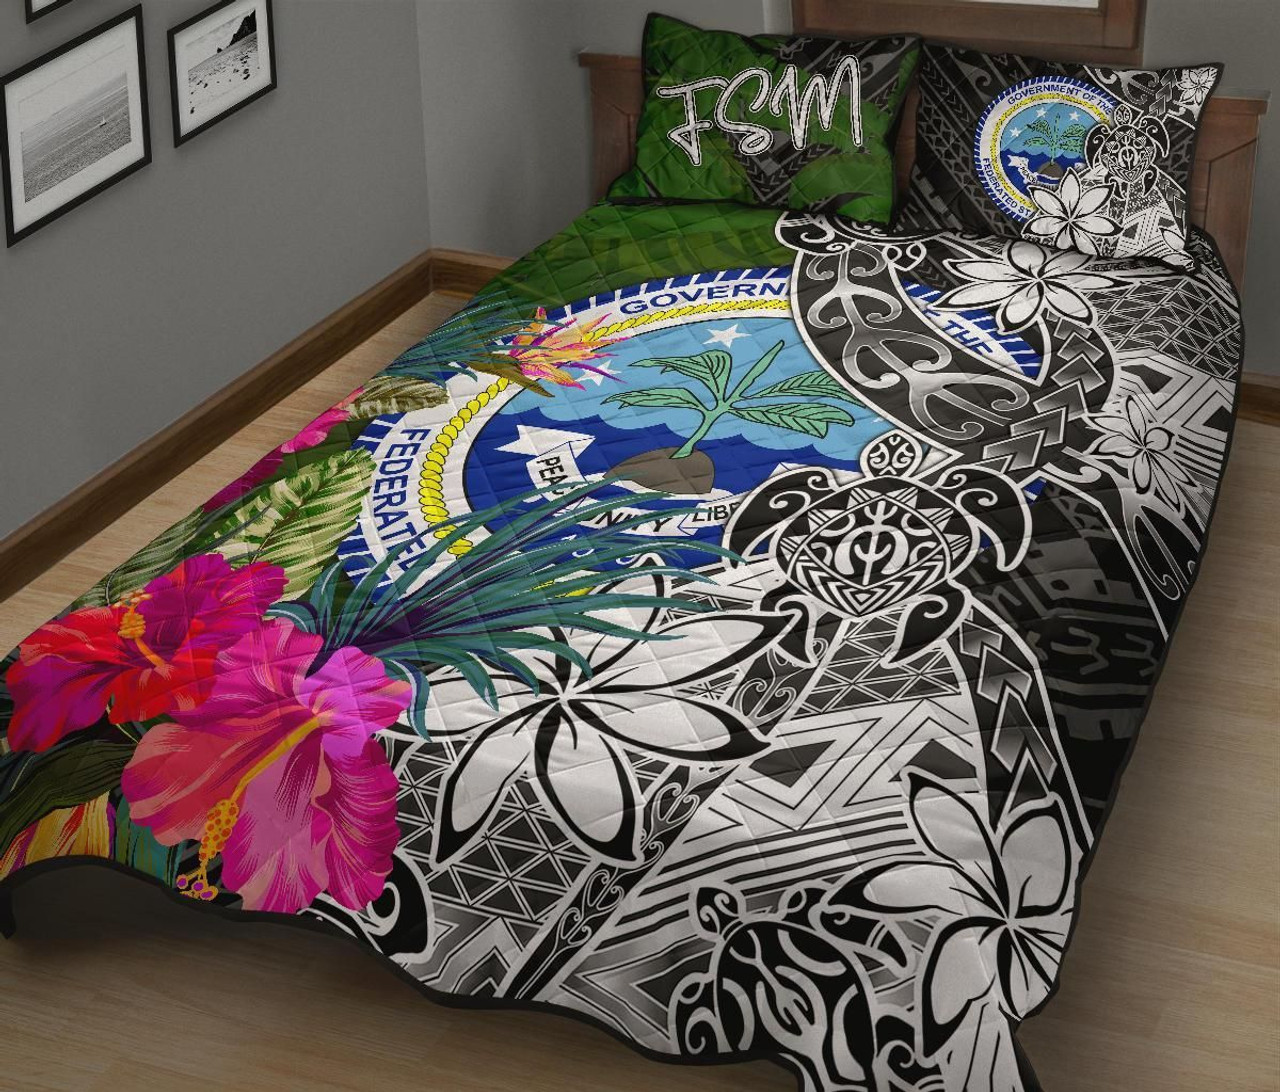 Federated States of Micronesia Quilt Bed Set - Turtle Plumeria Banana Leaf 2